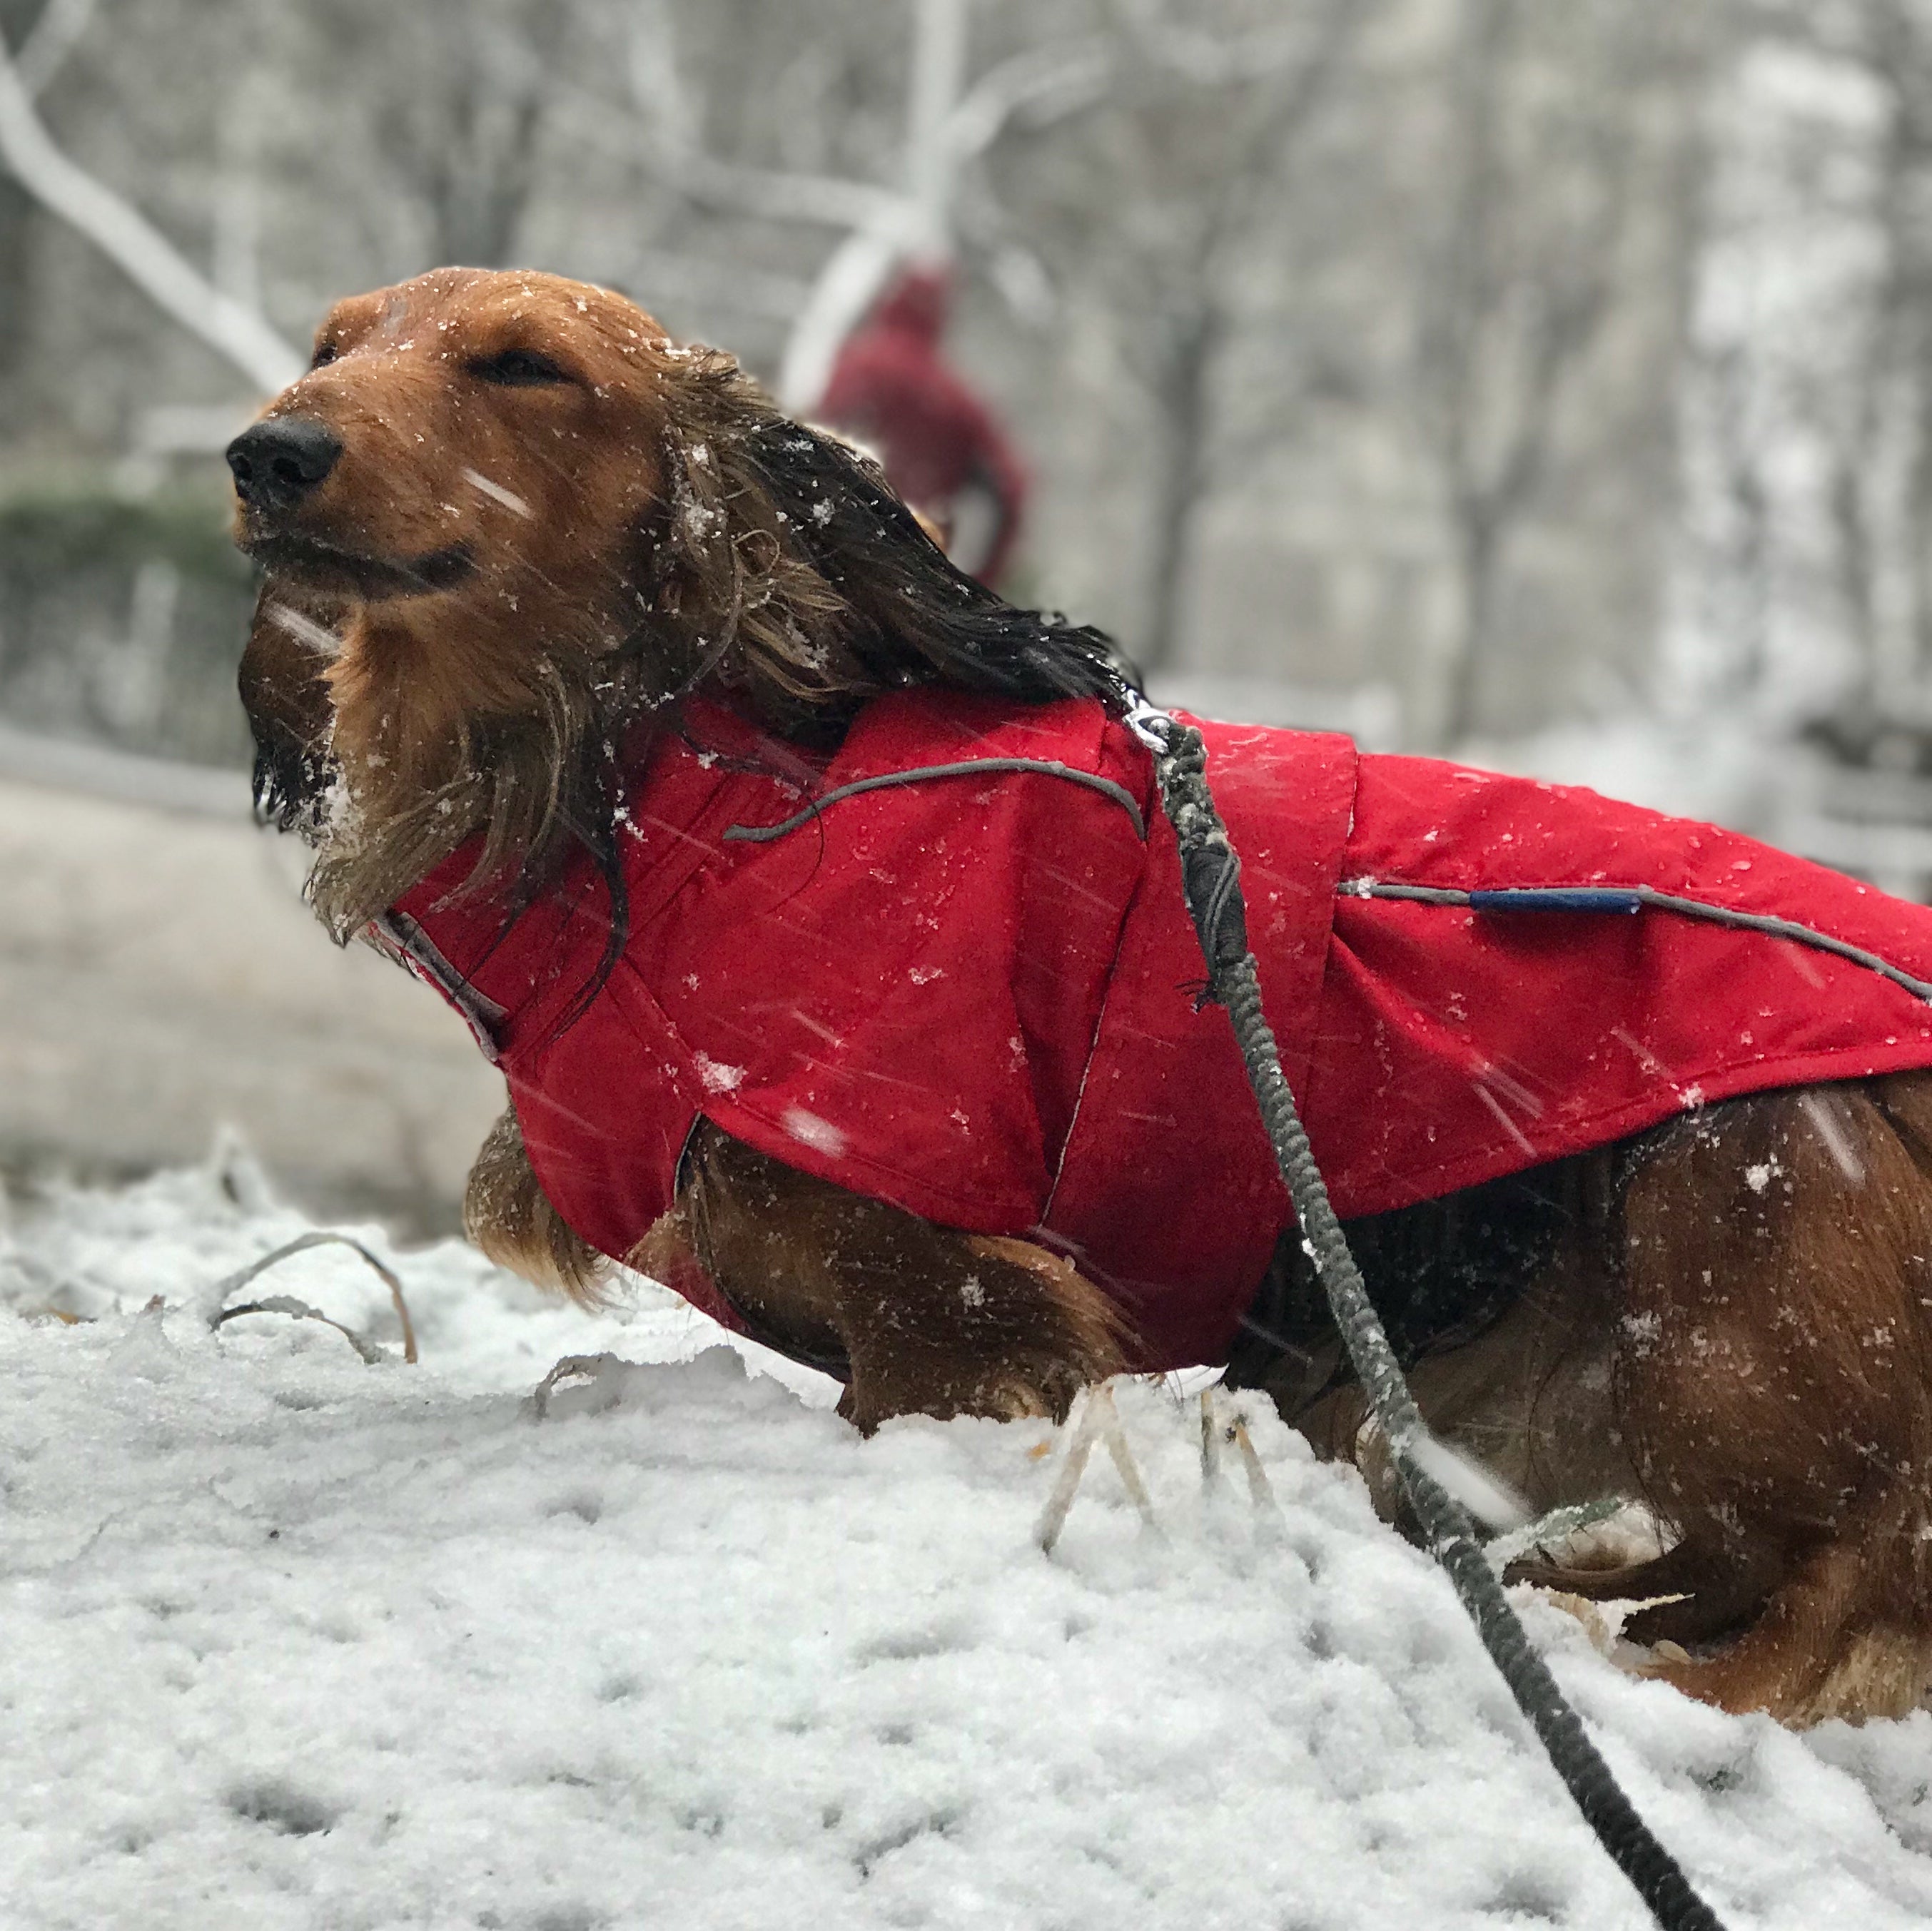 DJANGO City Slicker All-Weather Water-Repellent and Windproof Dog Jacket, Dog Raincoat and Dog Winter Coat in Cherry Red - Featuring reflective piping, adjustable velcro neck and chest closures, and elastic leg bands - djangobrand.com